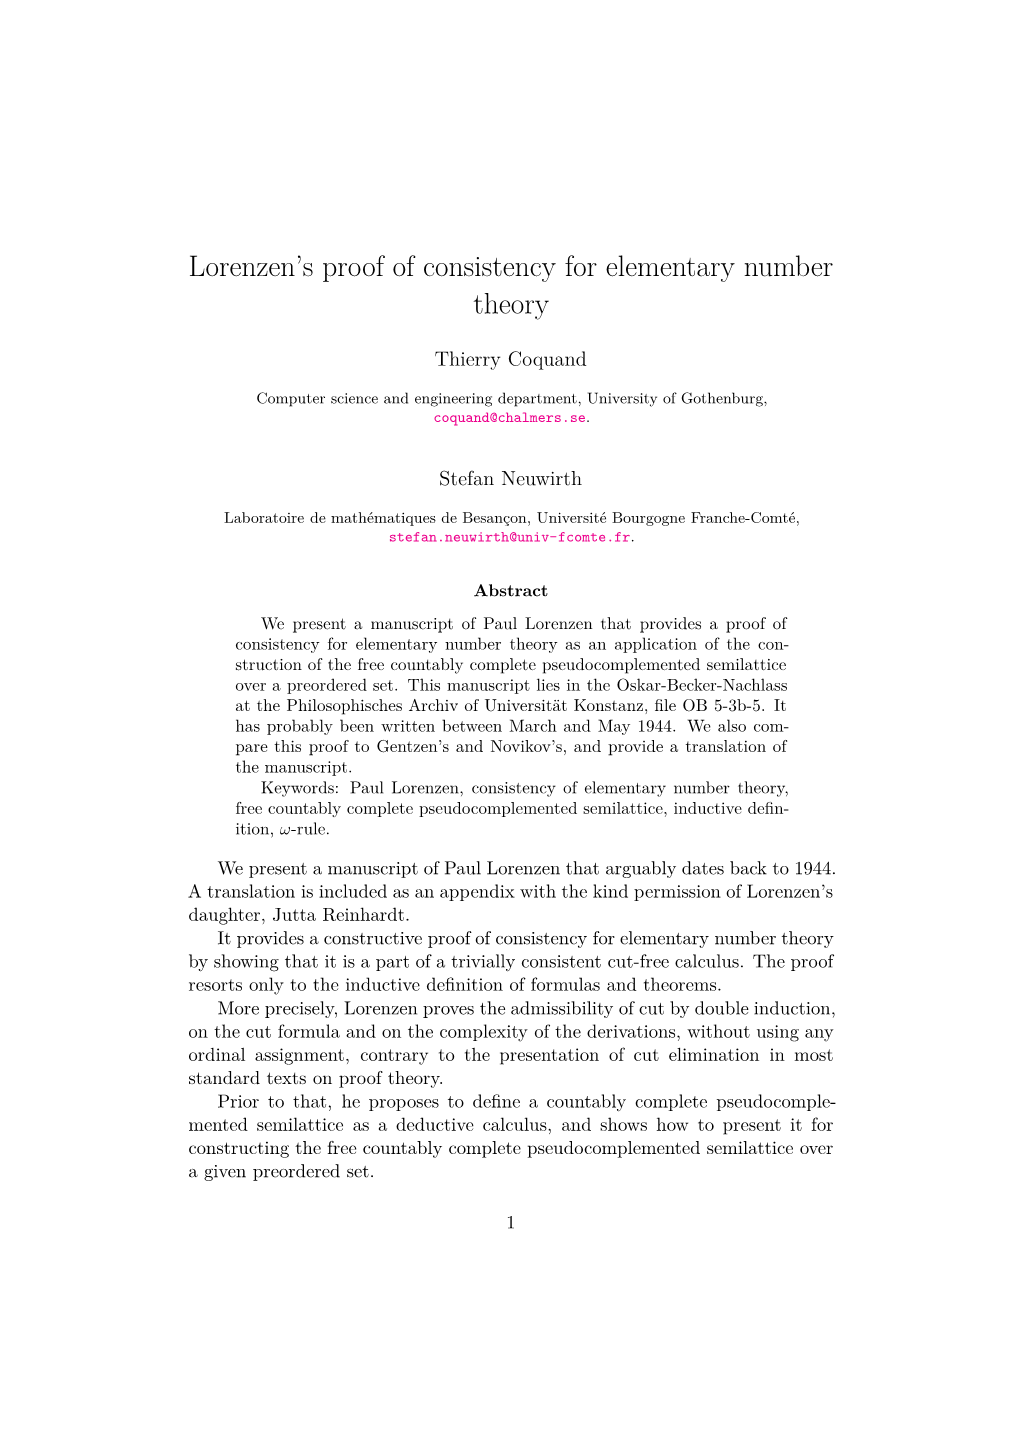 Lorenzen's Proof of Consistency for Elementary Number Theory